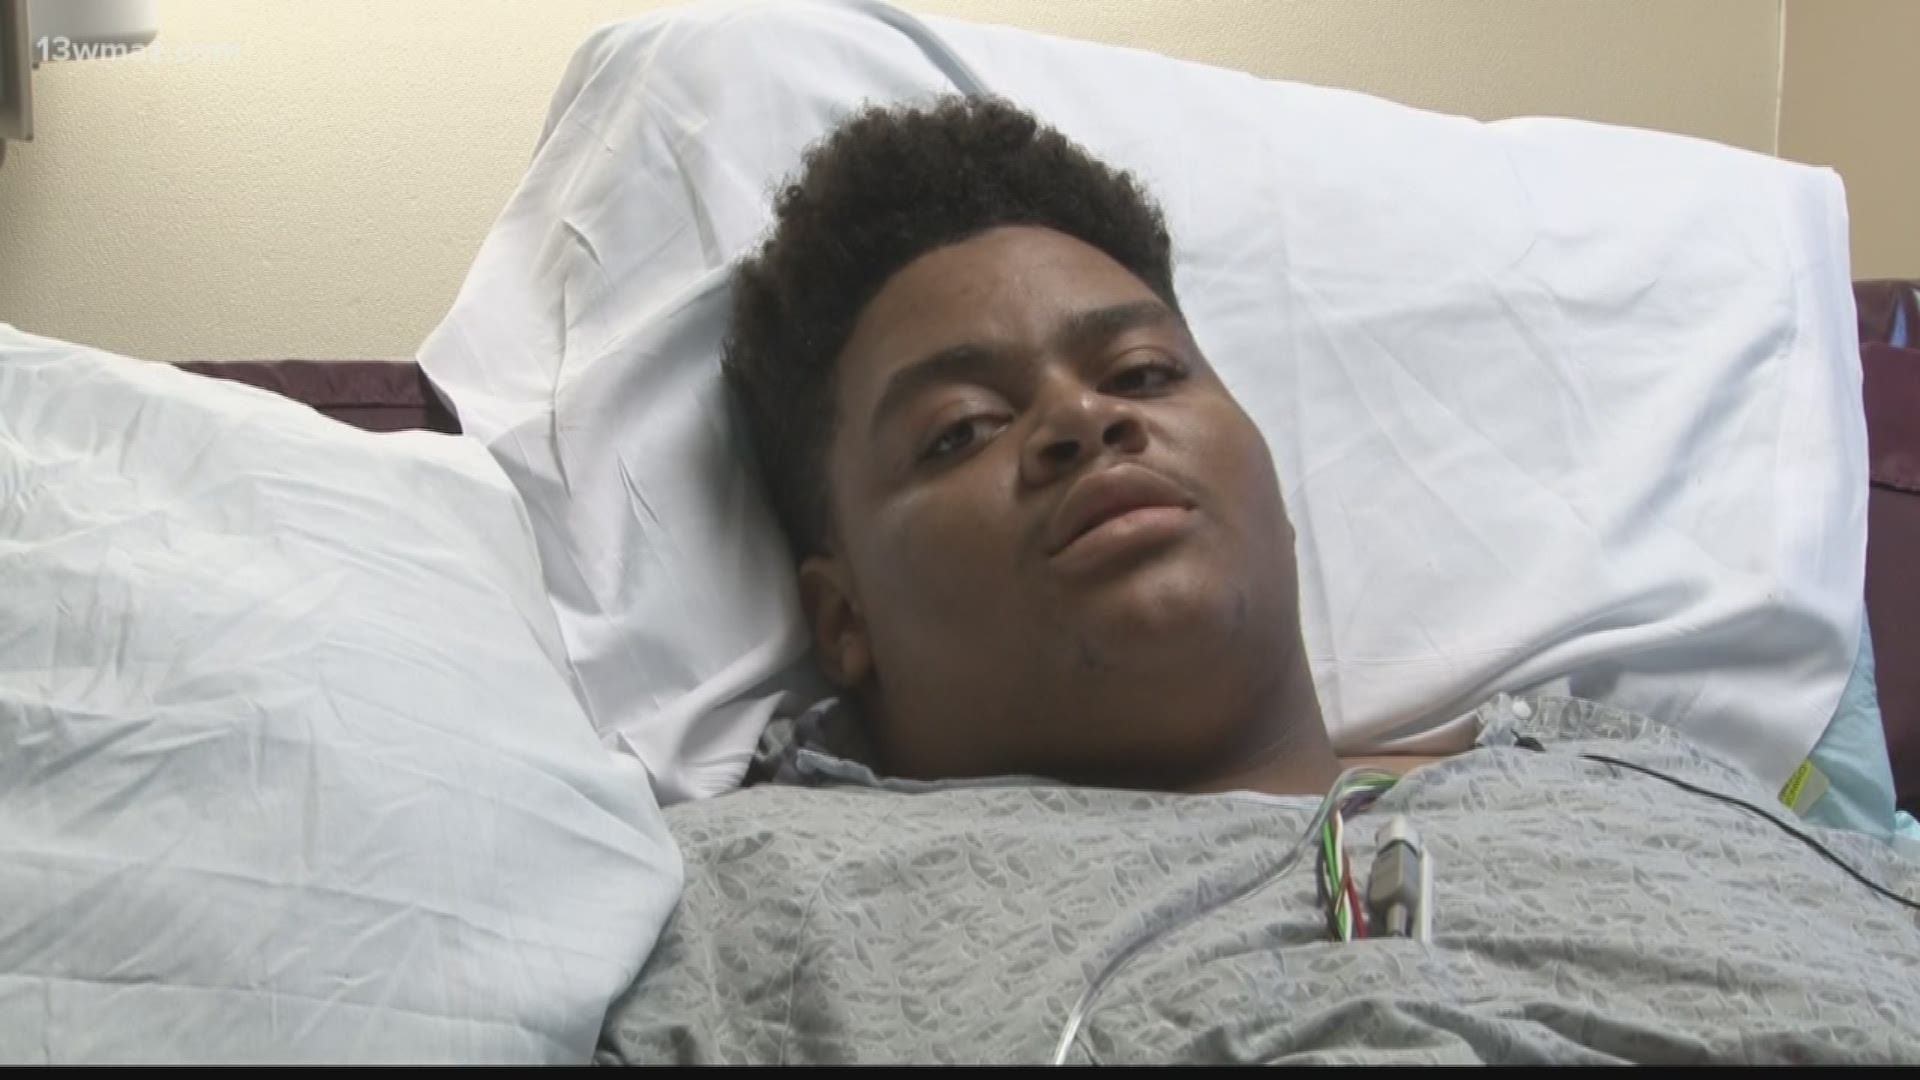 John Milledge Academy football player Willie Scott III is recovering after a car accident put him in the hospital nearly two weeks ago with severe injuries, but the teen says he won't let that wreck destroy the next stage of his life.